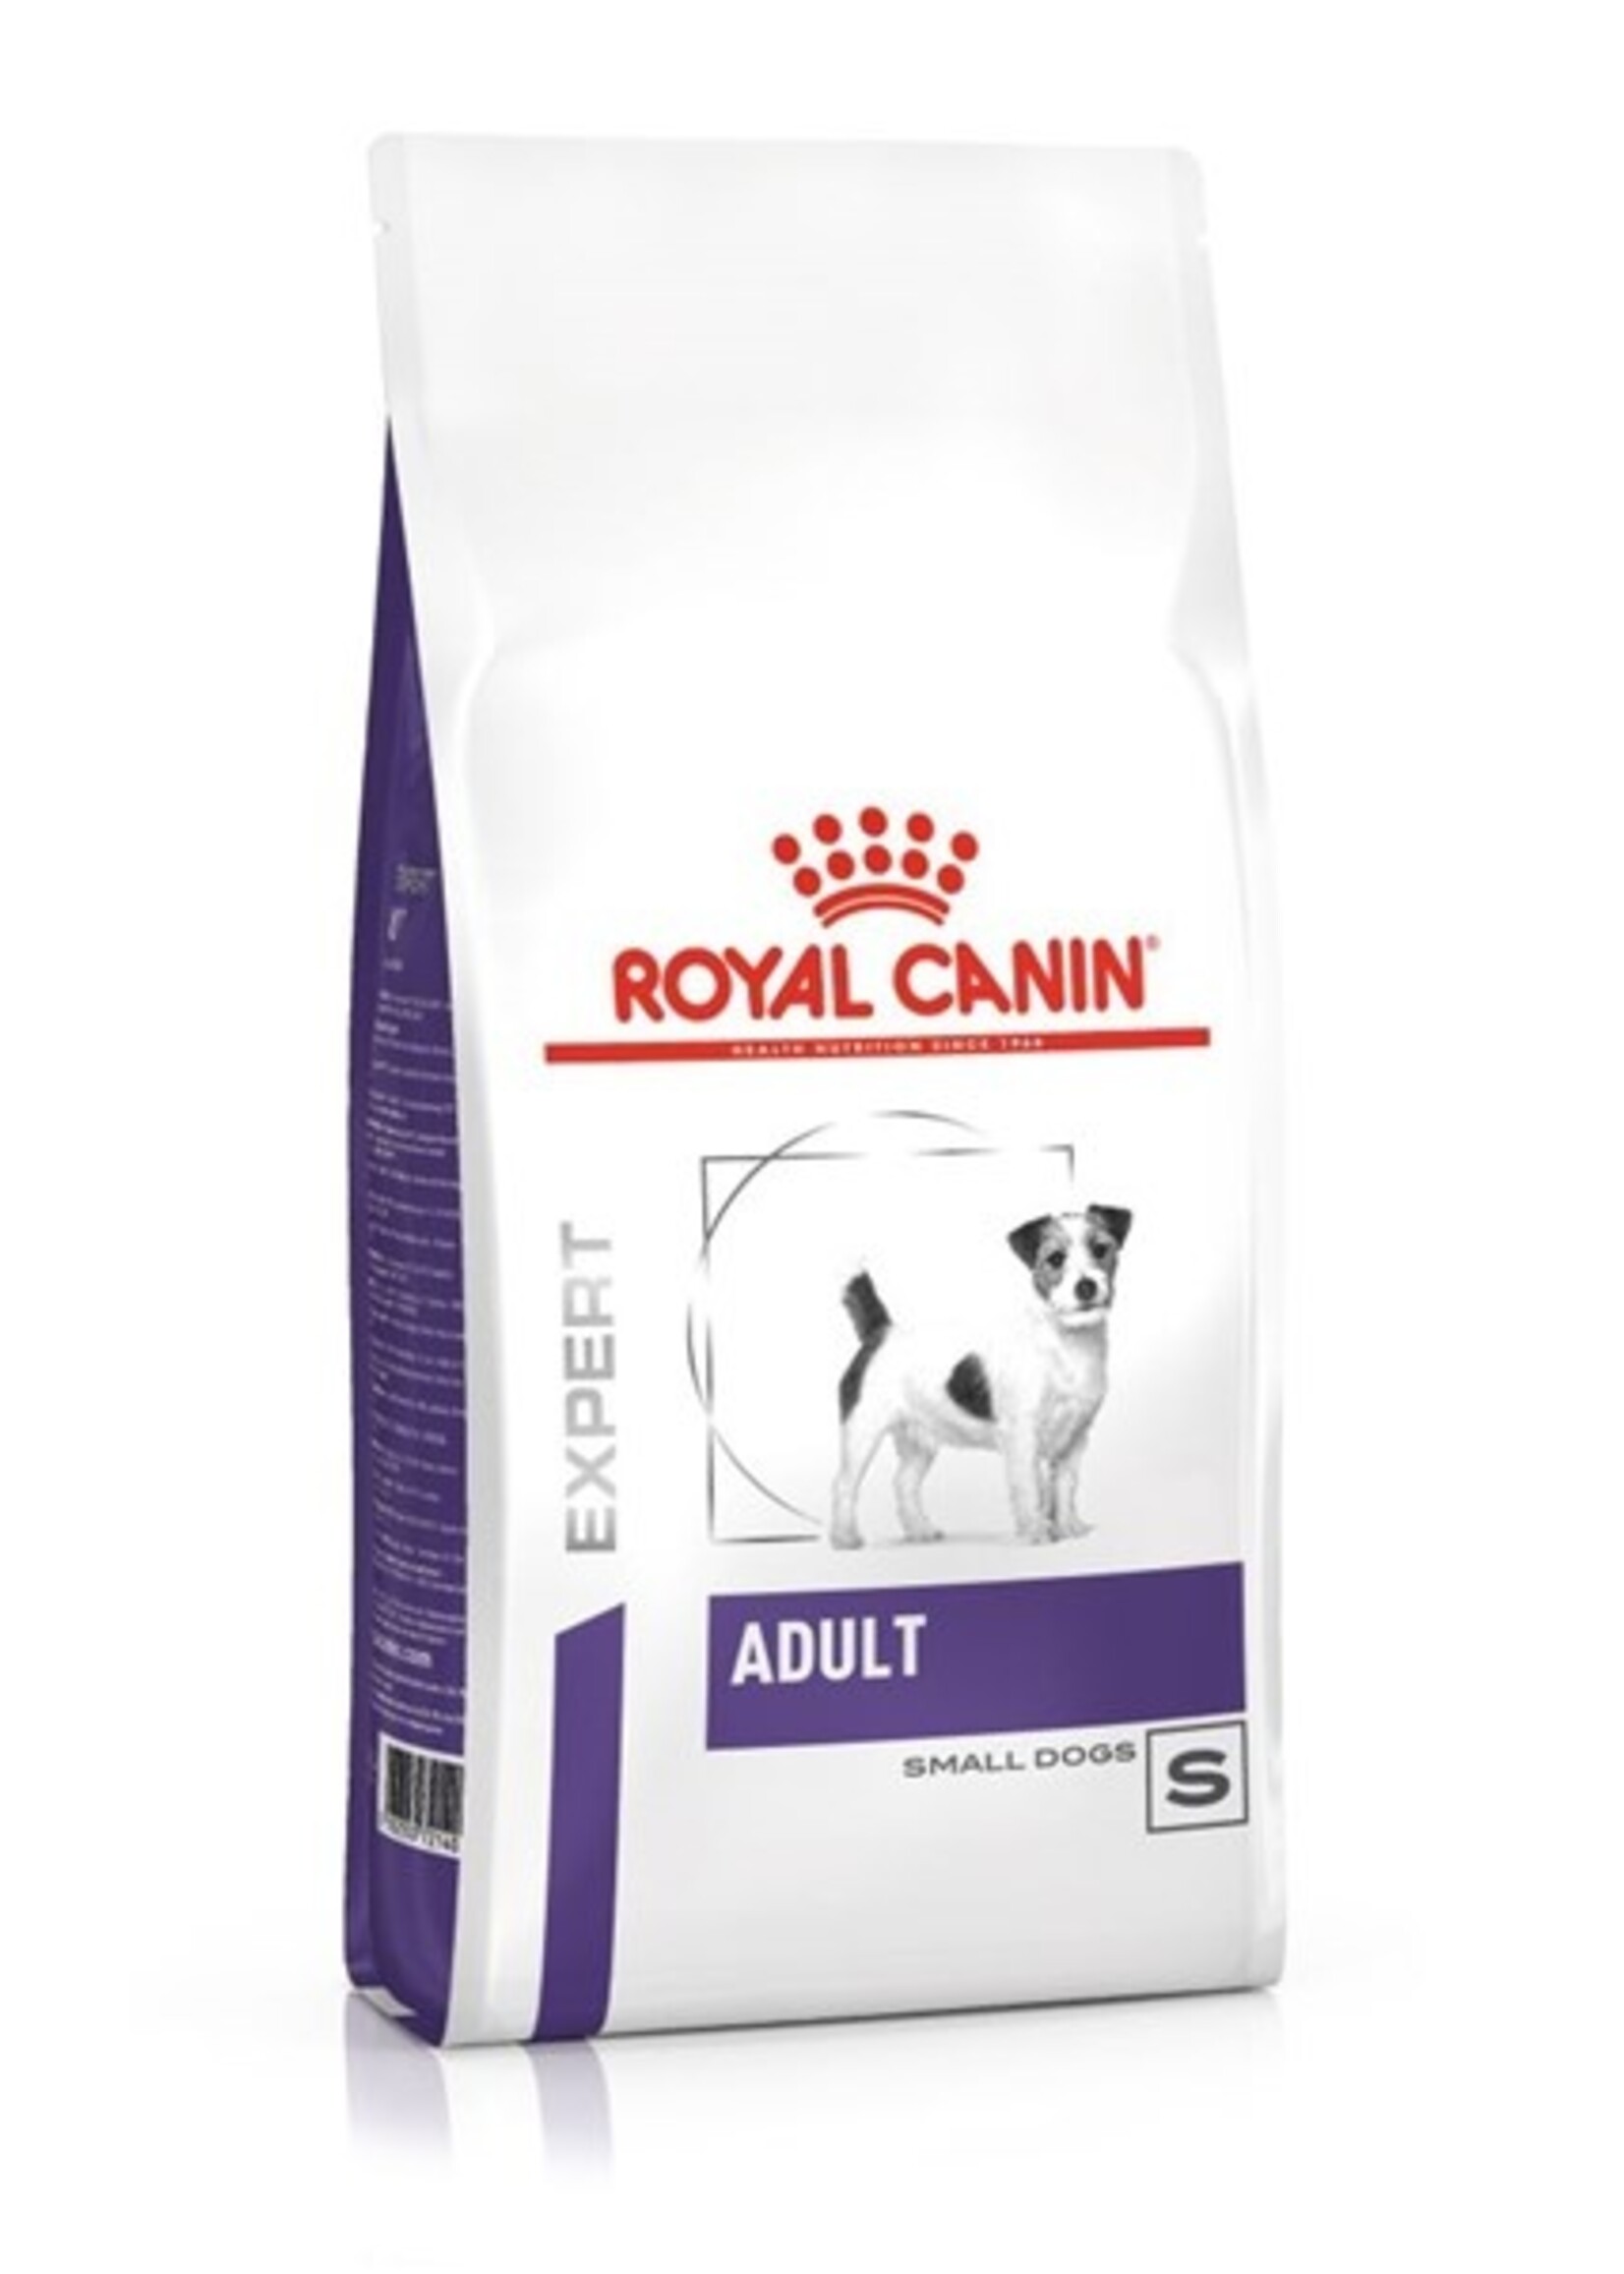 Royal Canin Royal Canin Adult Small Breed Chien (Dental Digest) 8kg